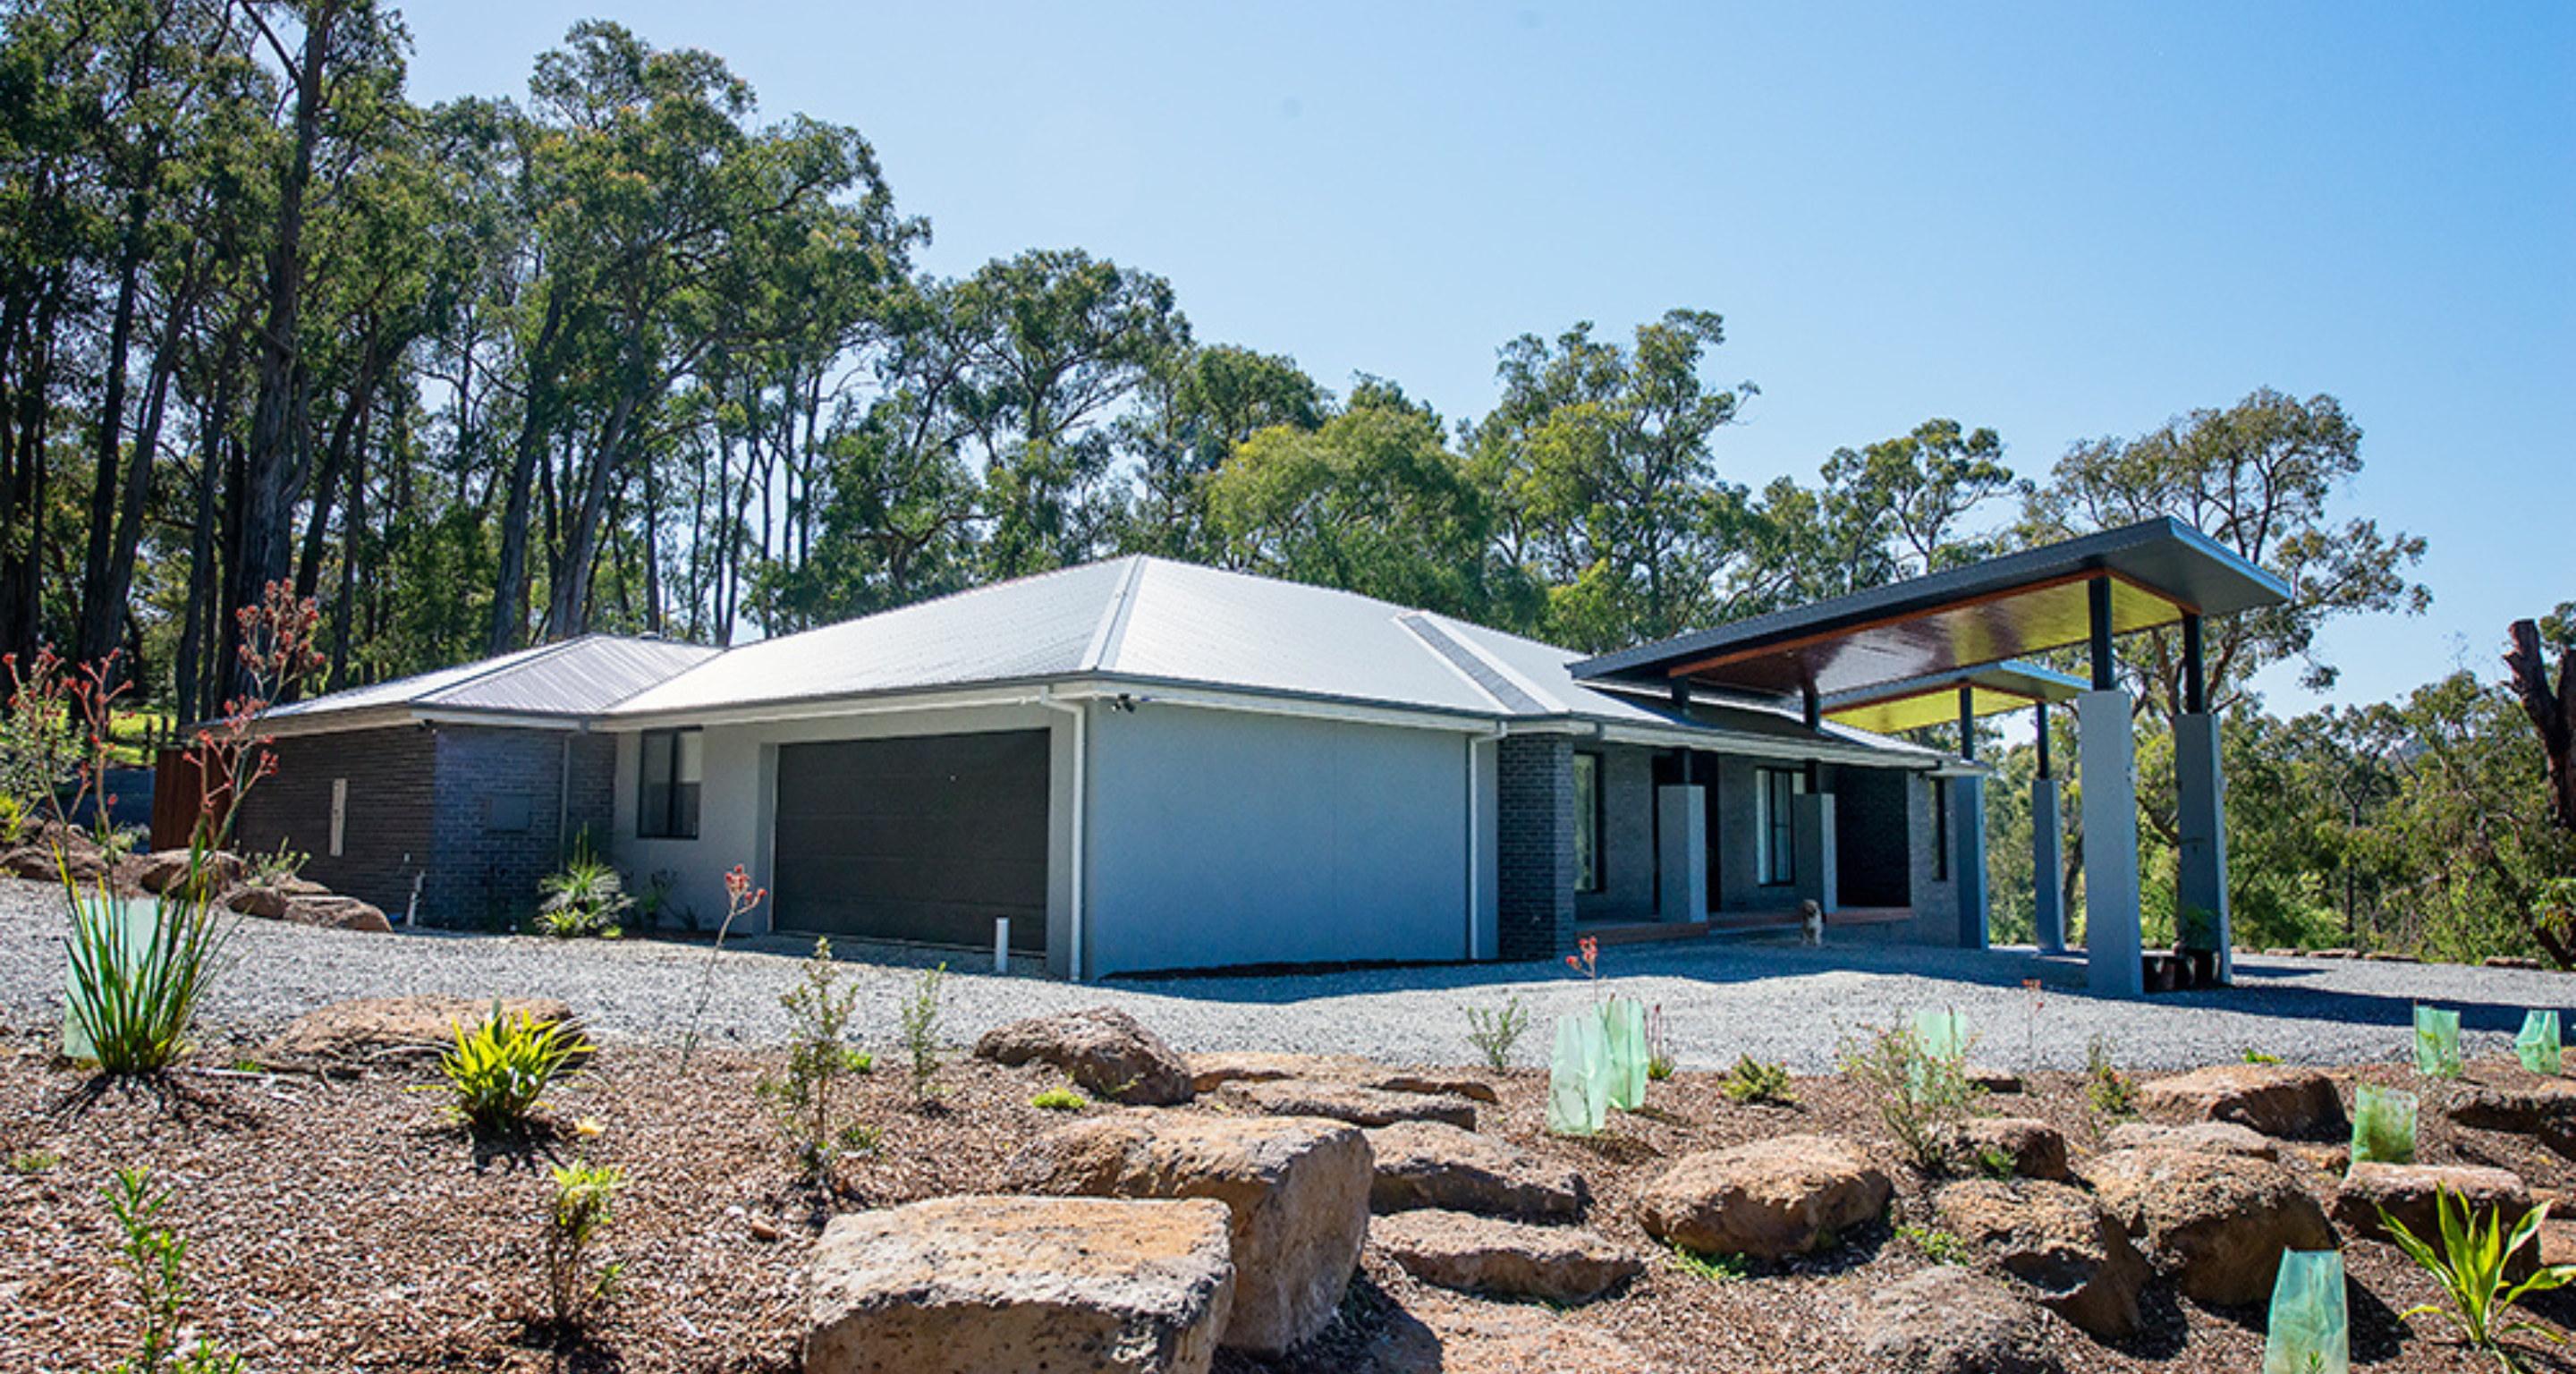 Combining luxury, elegance and nature for your custom Yarra Valley home.